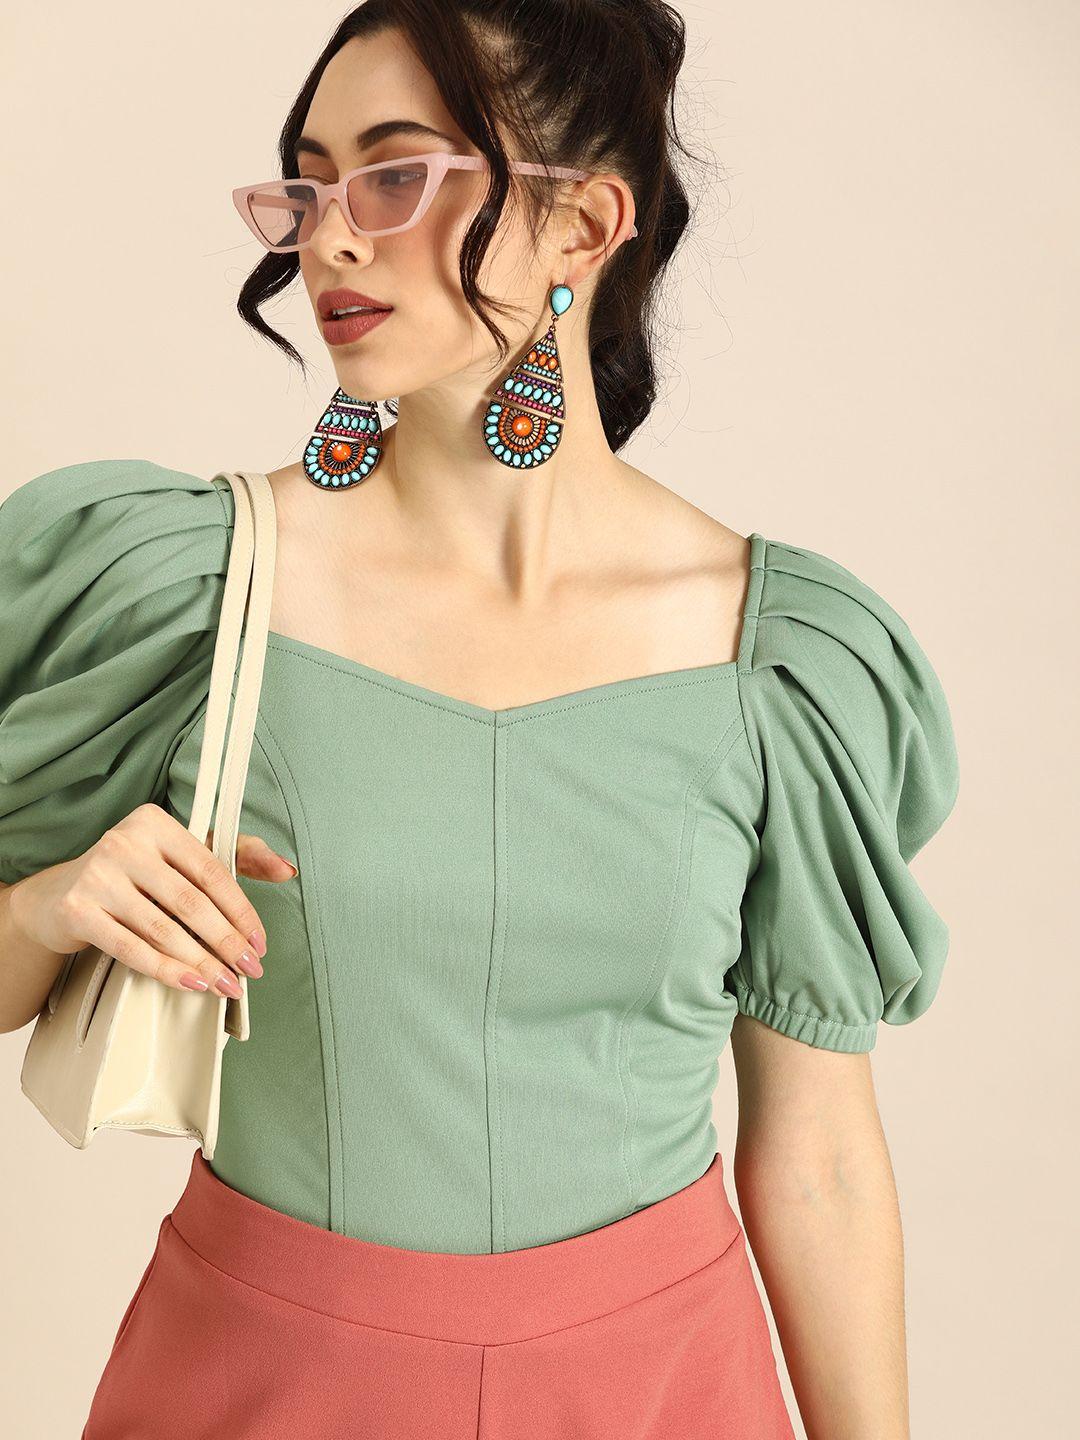 athena-stylish-green-power-shoulders-top